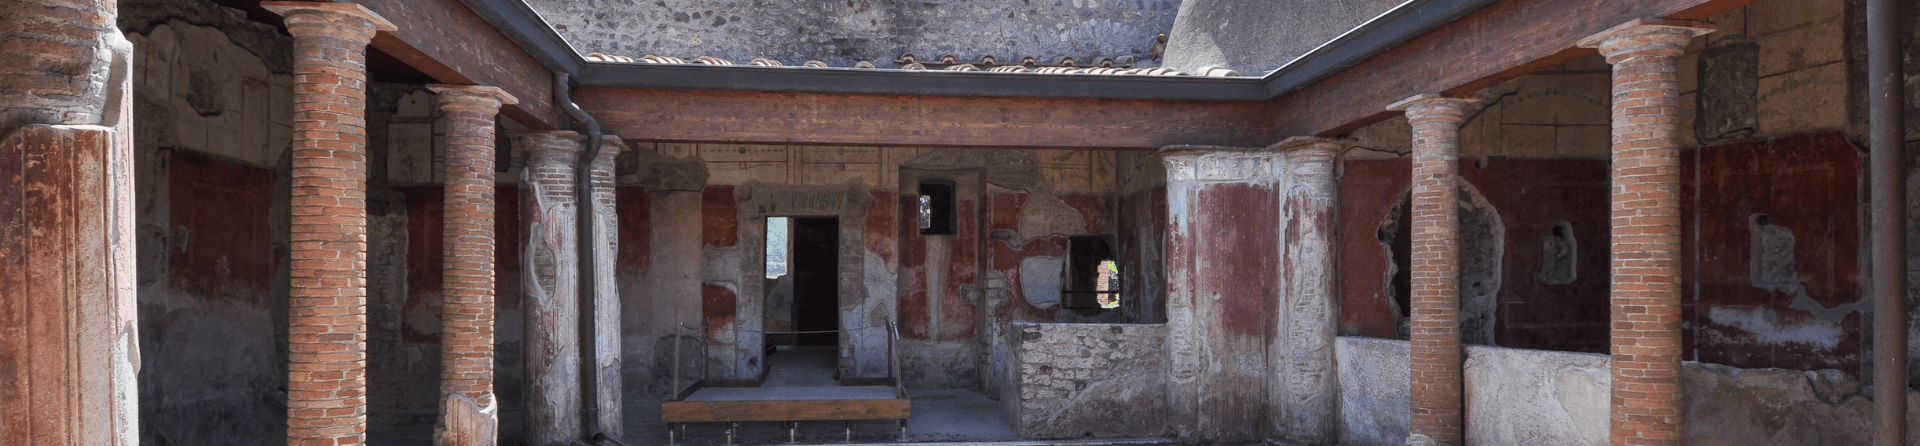 When was Pompeii fully discovered?